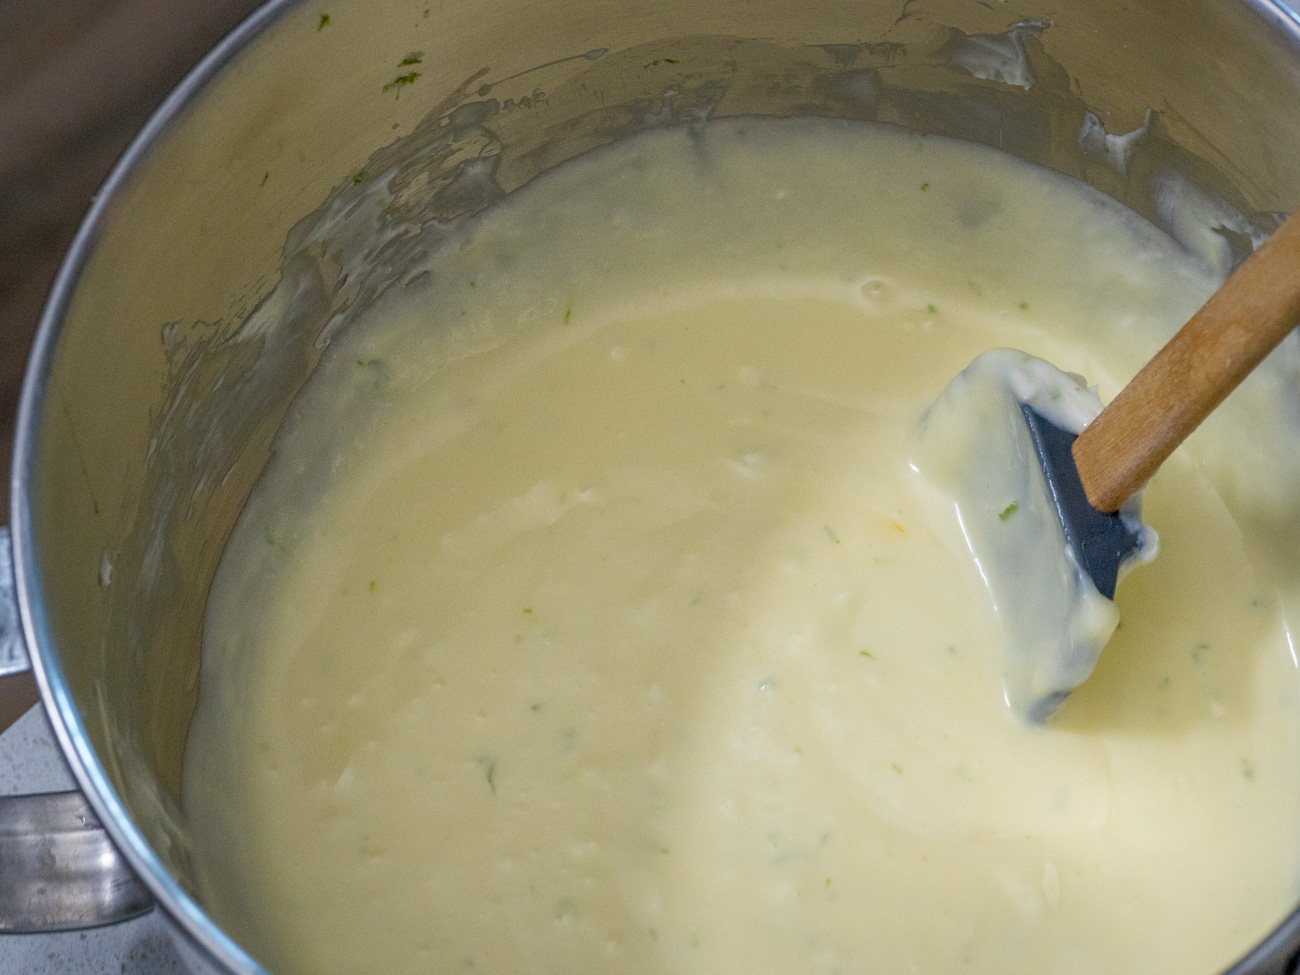 Add lime juice and mix until combined. Add the eggs and mix until just combined. Don't over mix because it can cause the cheesecake to crack while baking.